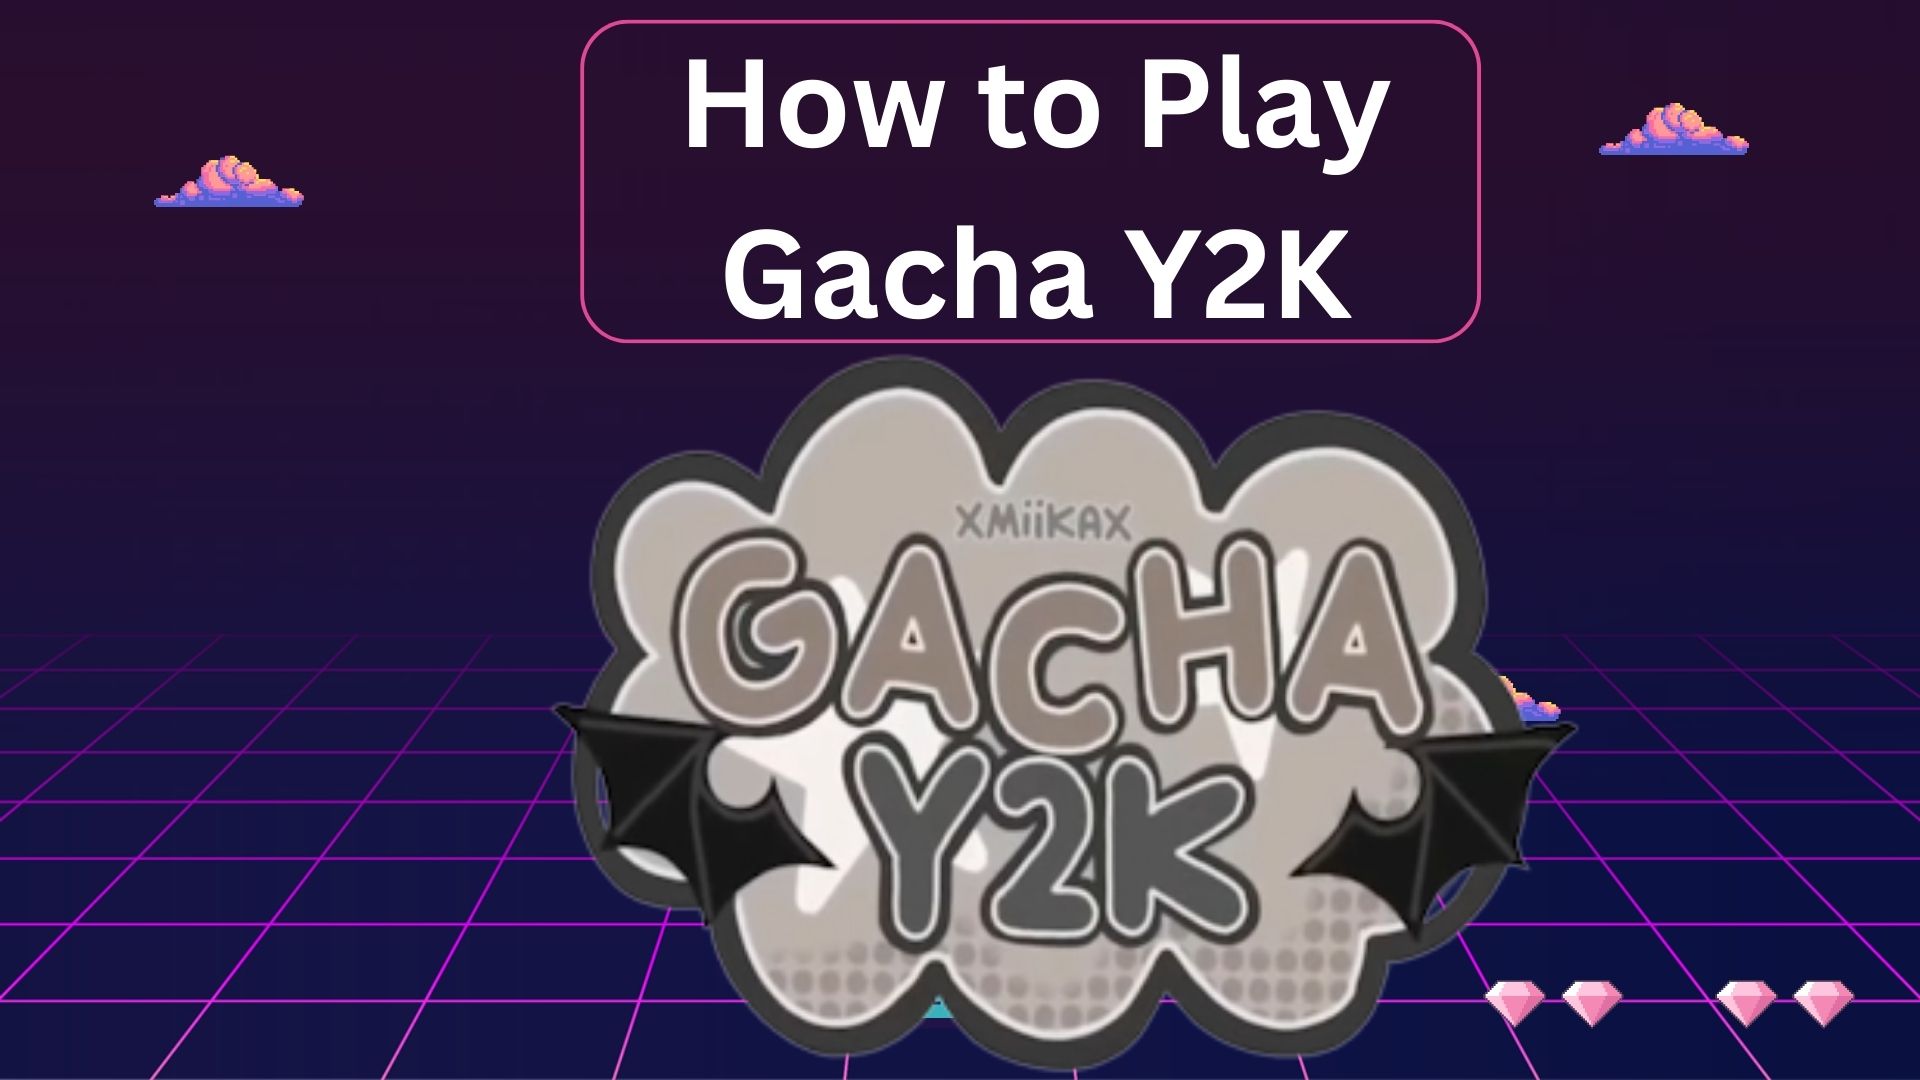 How to Play Gacha Y2K